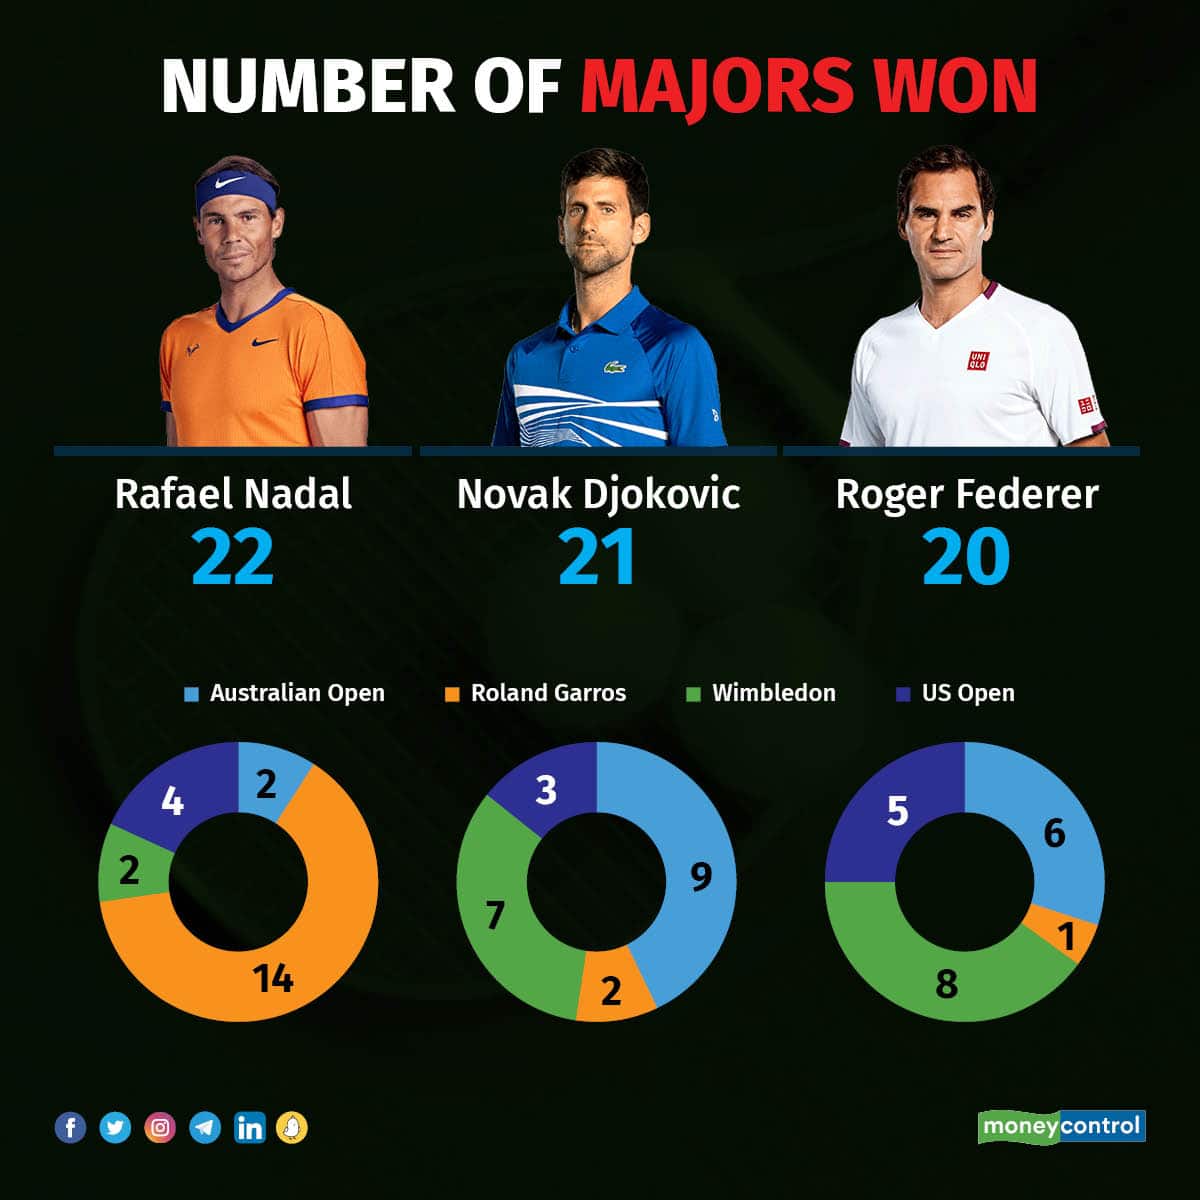 with Djokovic out of this year’s US Open, can Nadal win his 23rd major and widen his lead?